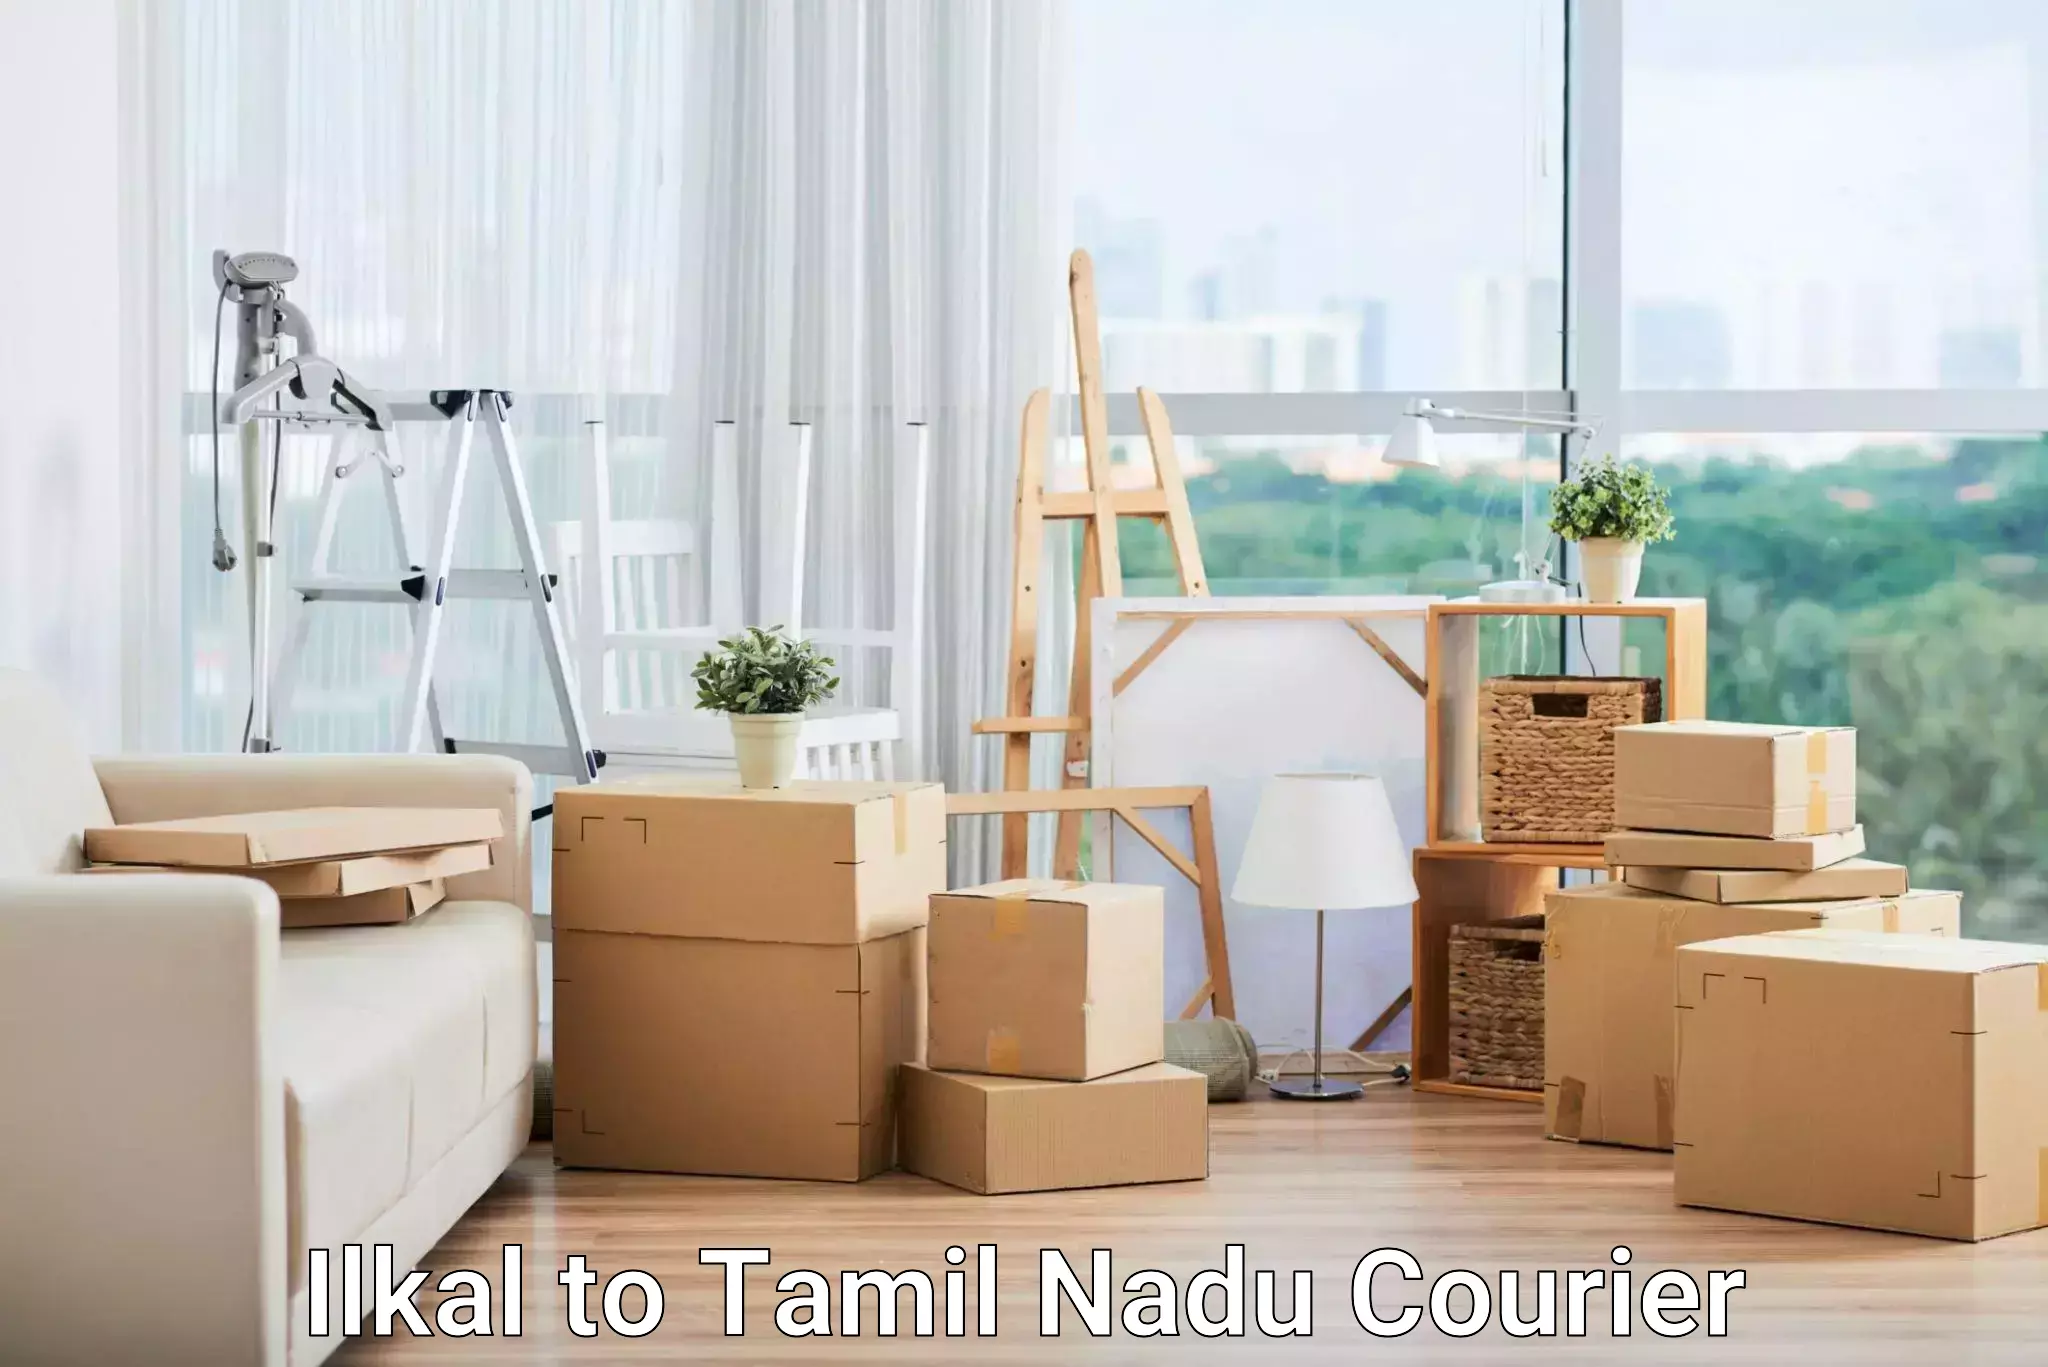 Supply chain delivery in Ilkal to Tamil Nadu